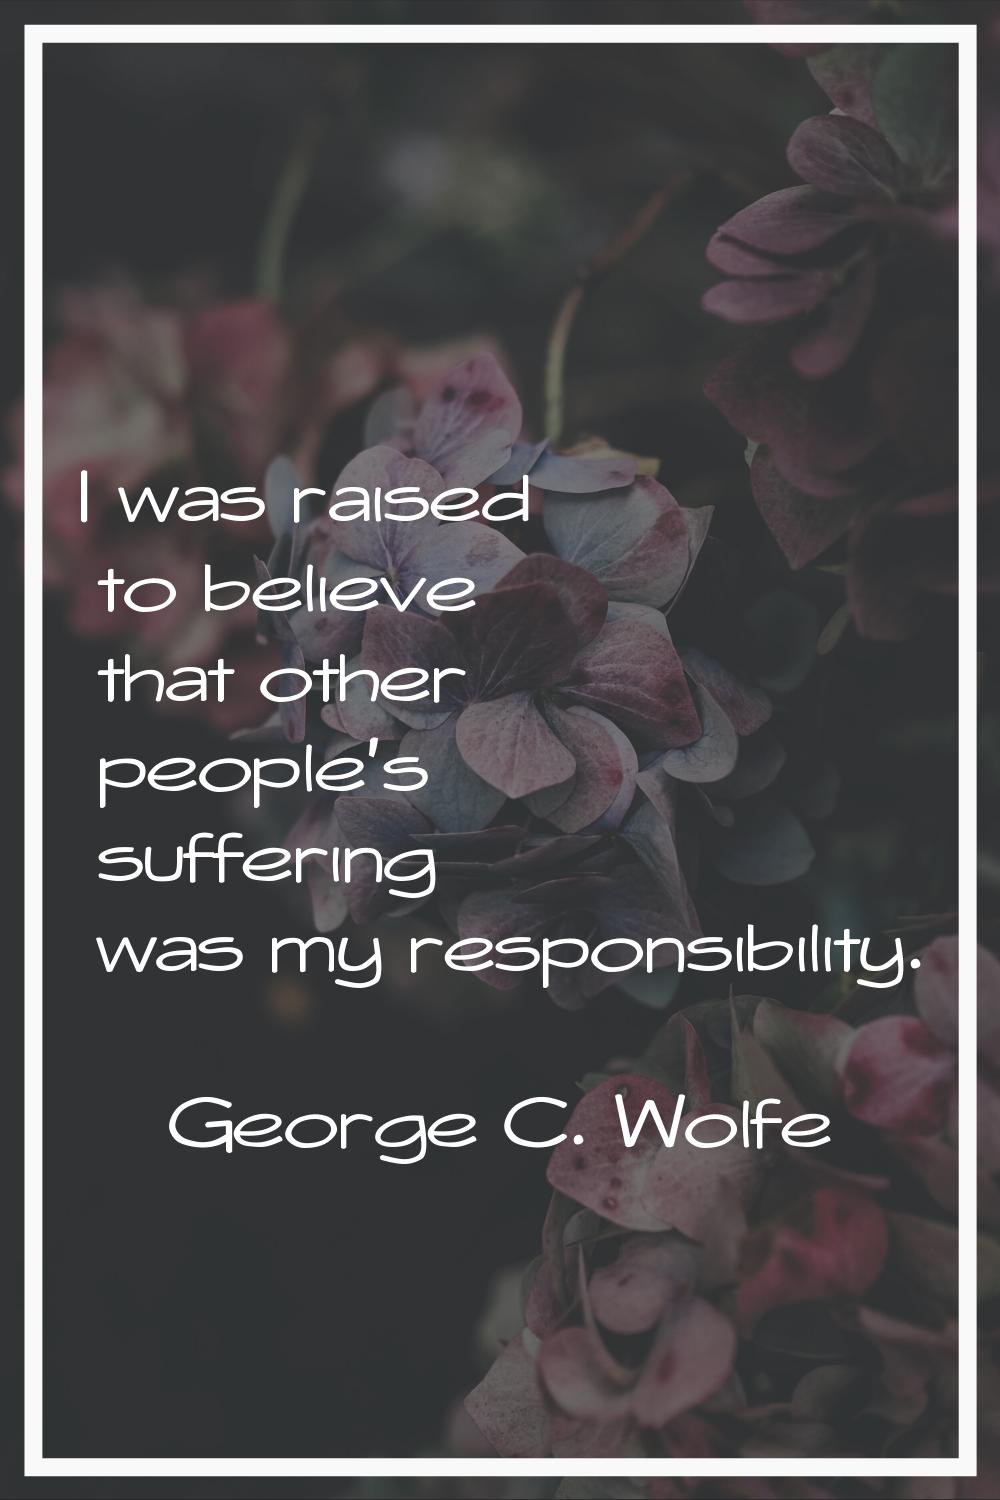 I was raised to believe that other people's suffering was my responsibility.